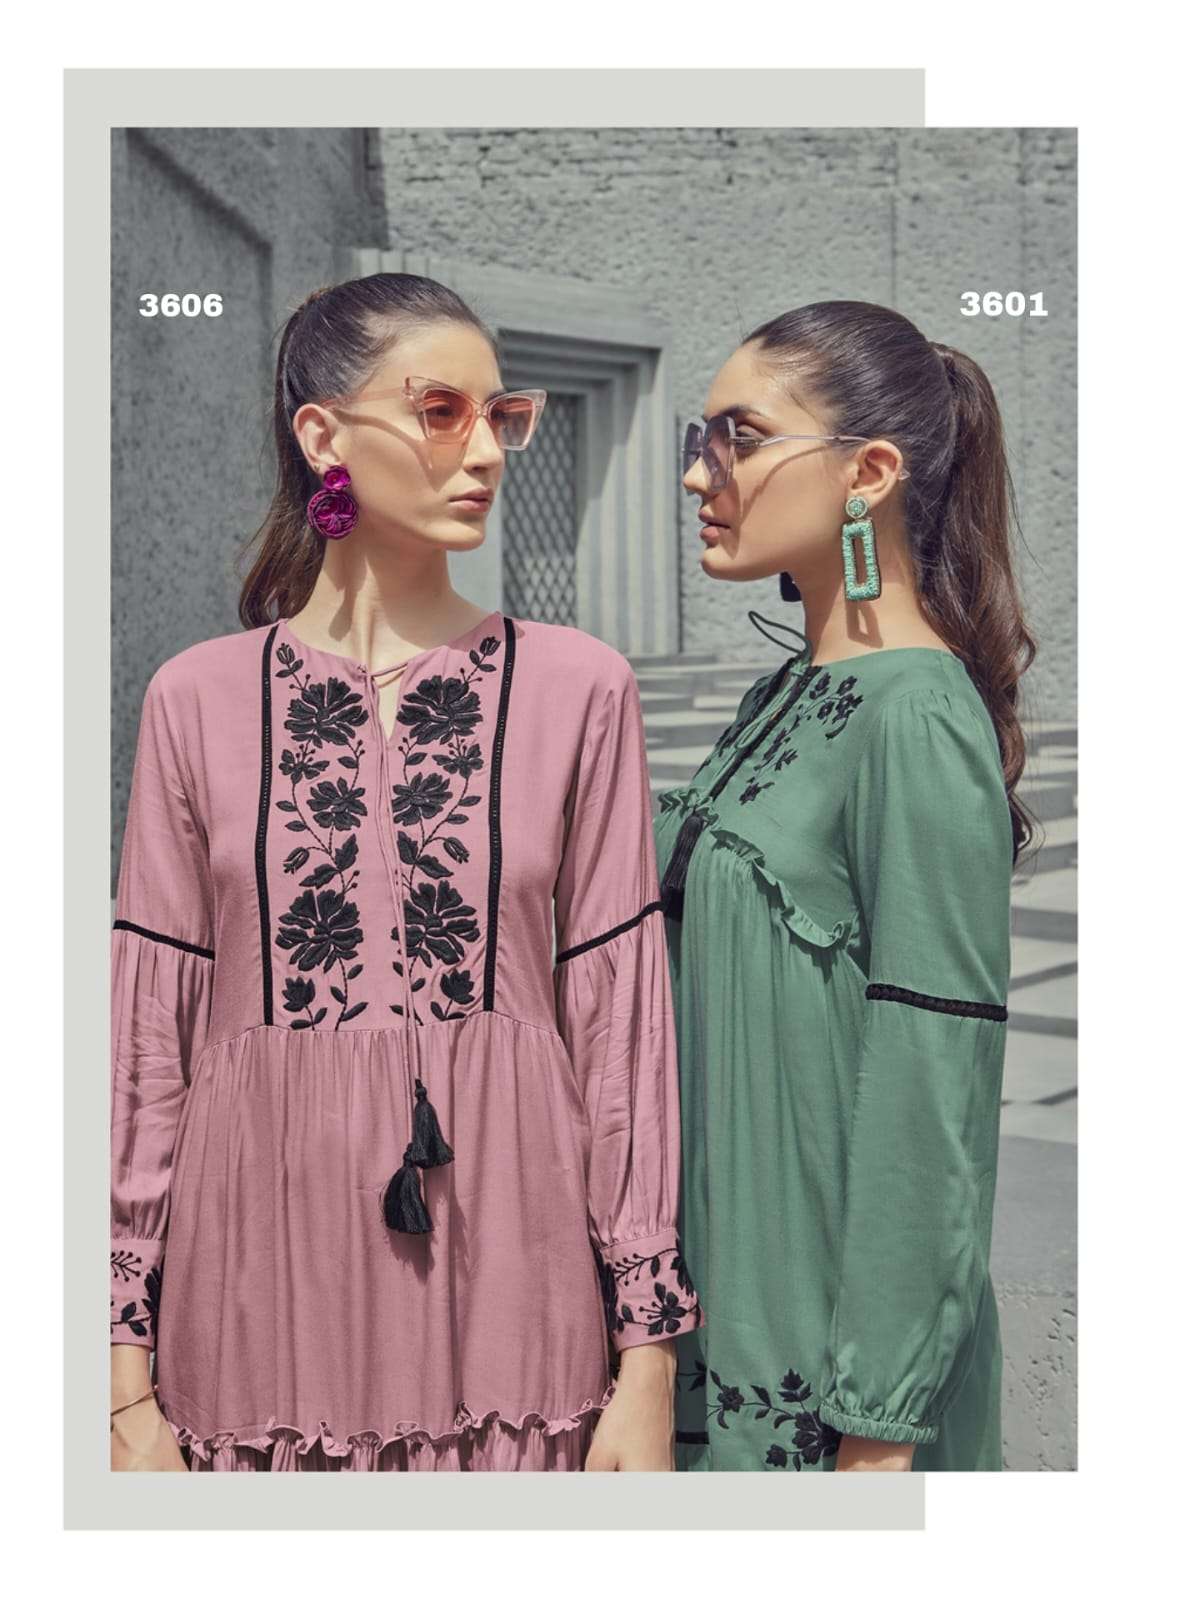 VOL-36 BY NU BRAND PRESENTS LIVA GRADE RAYON EMBROIDERY WORK STYLISH TUNICS WITH COTTON LACES - WHOL...